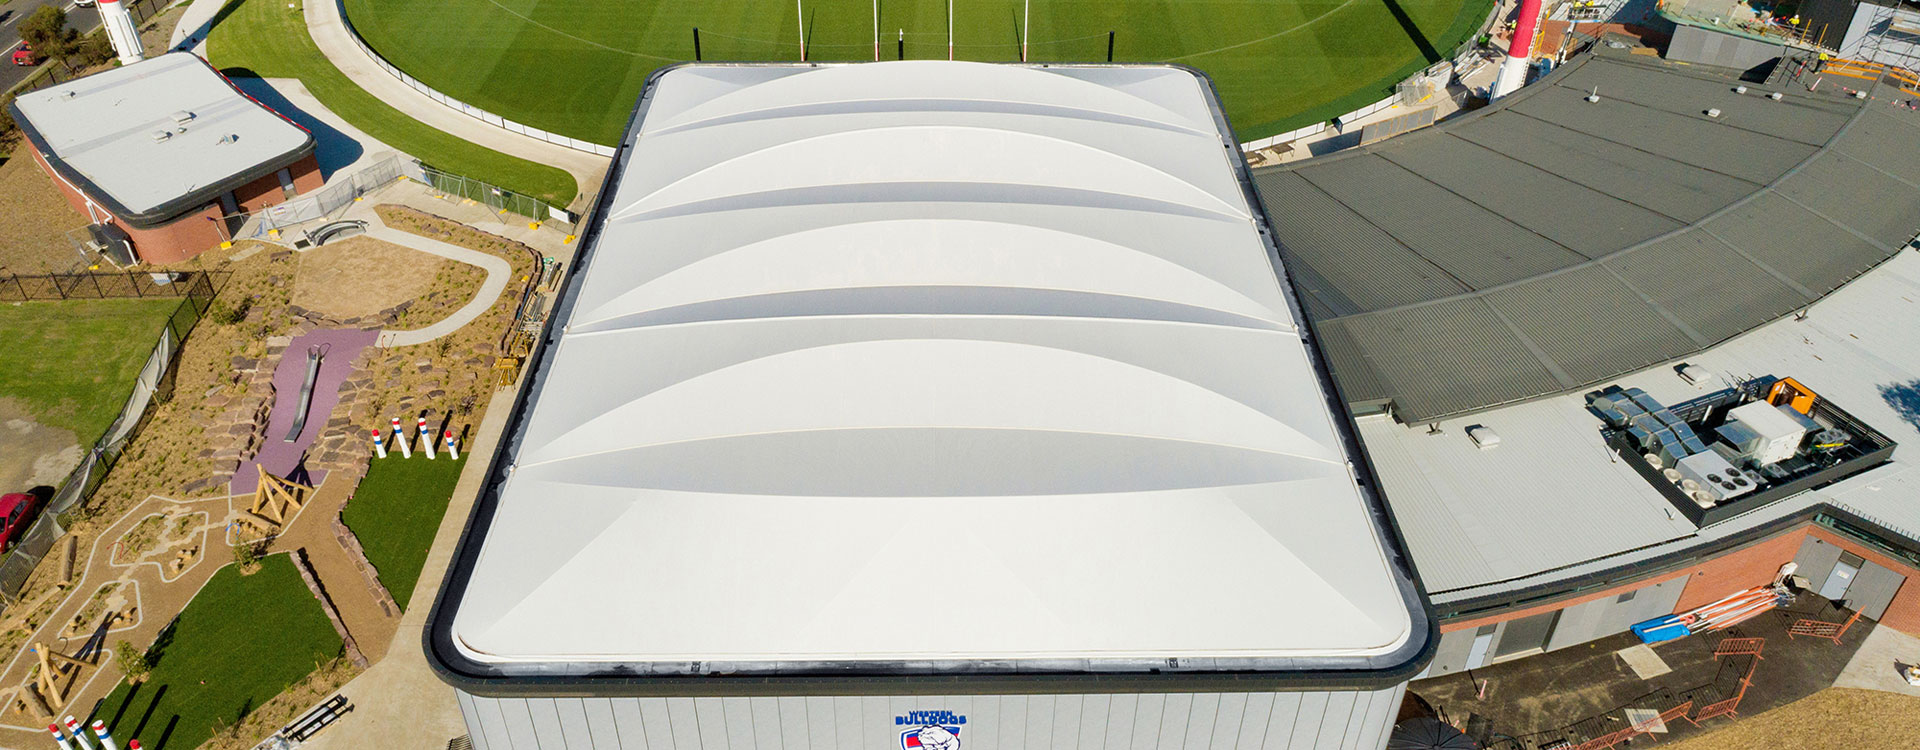 Whitten Oval Indoor Training Facility